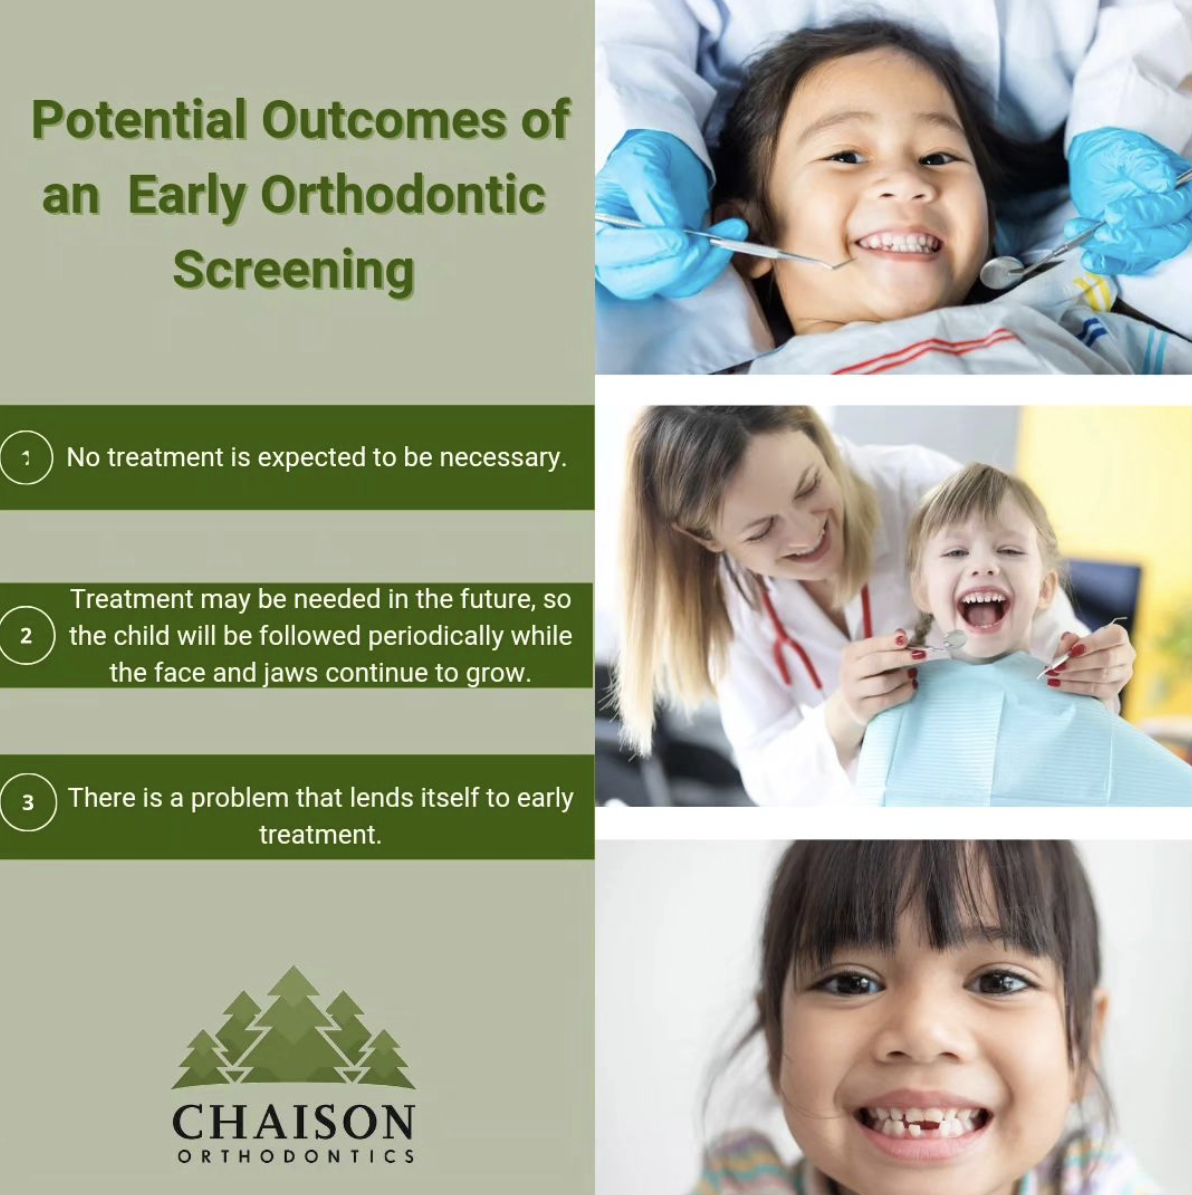 Potential Outcomes of an Early Orthodontic Screening at Chaison Orthodontics